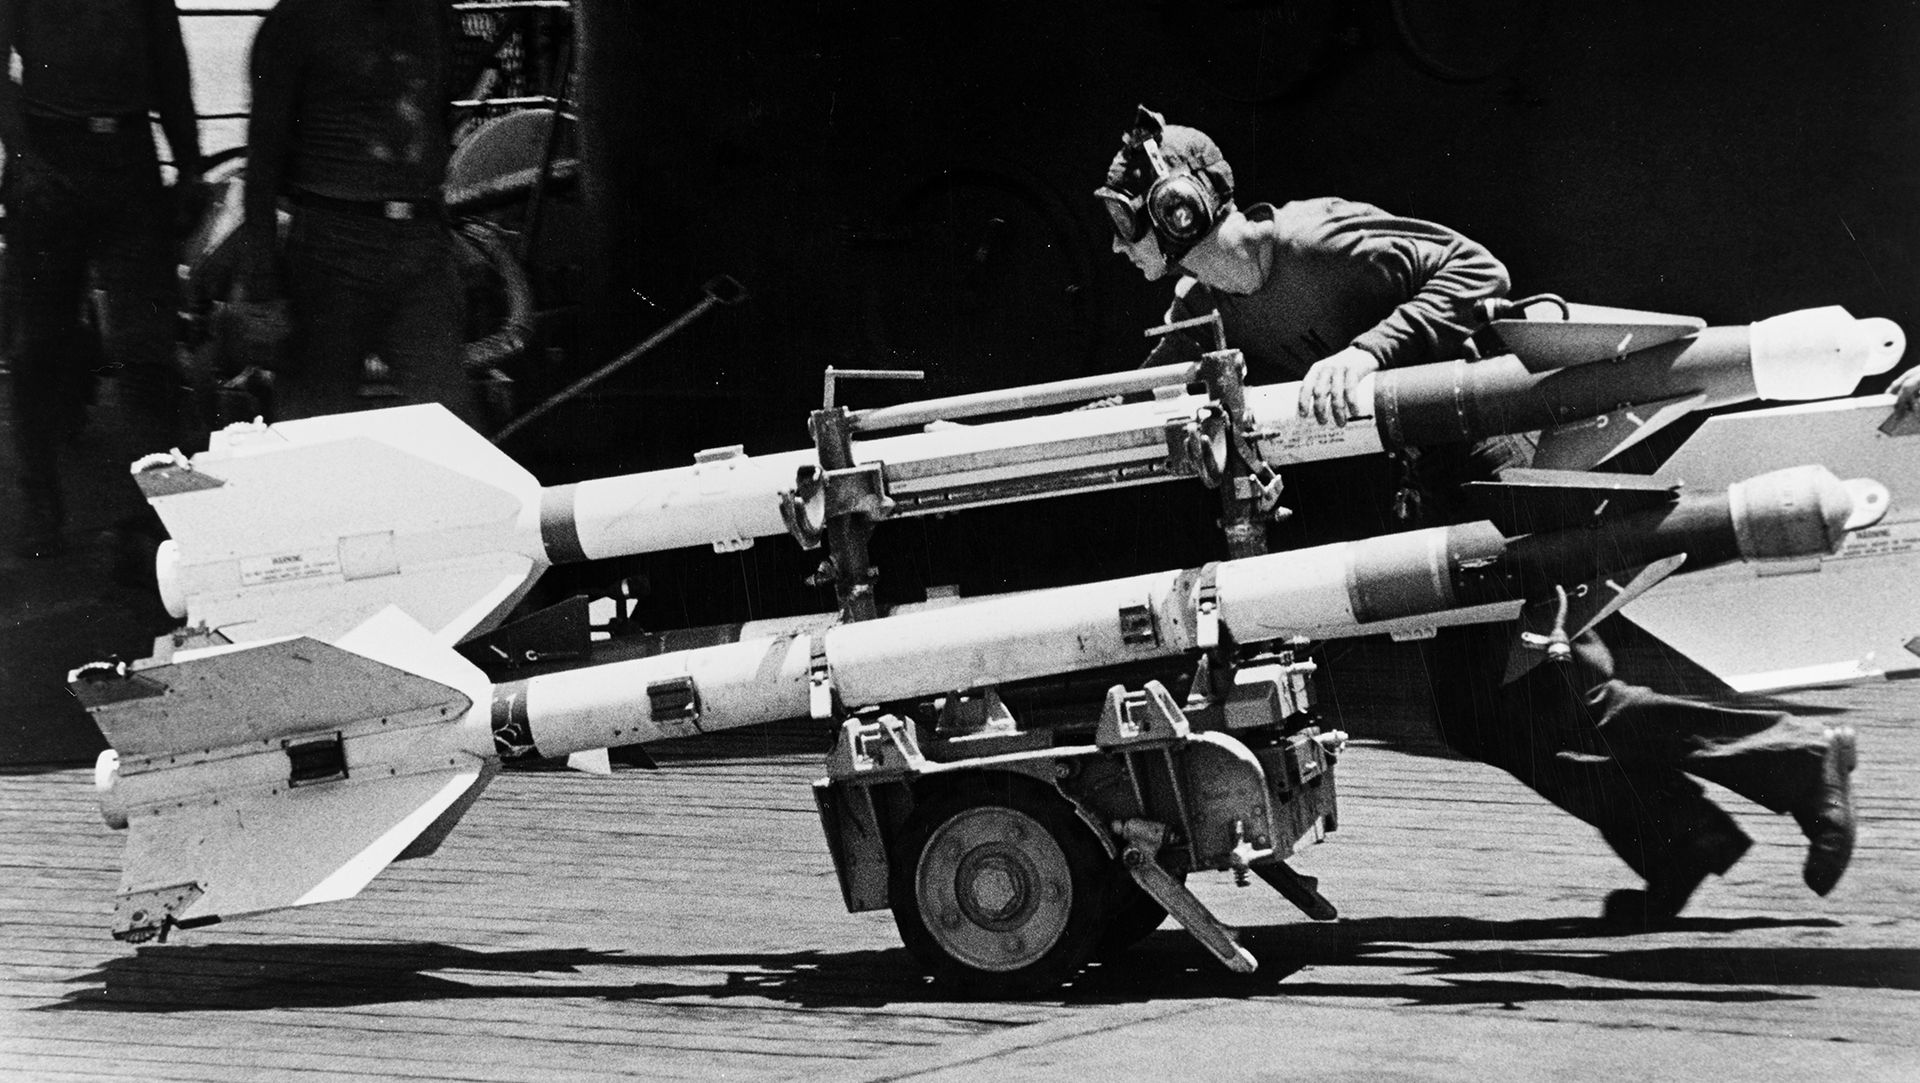 a crewman wheels a cart loaded with three sidewinder airtoair guided missiles across the flight deck, during operations off vietnam in april 1967